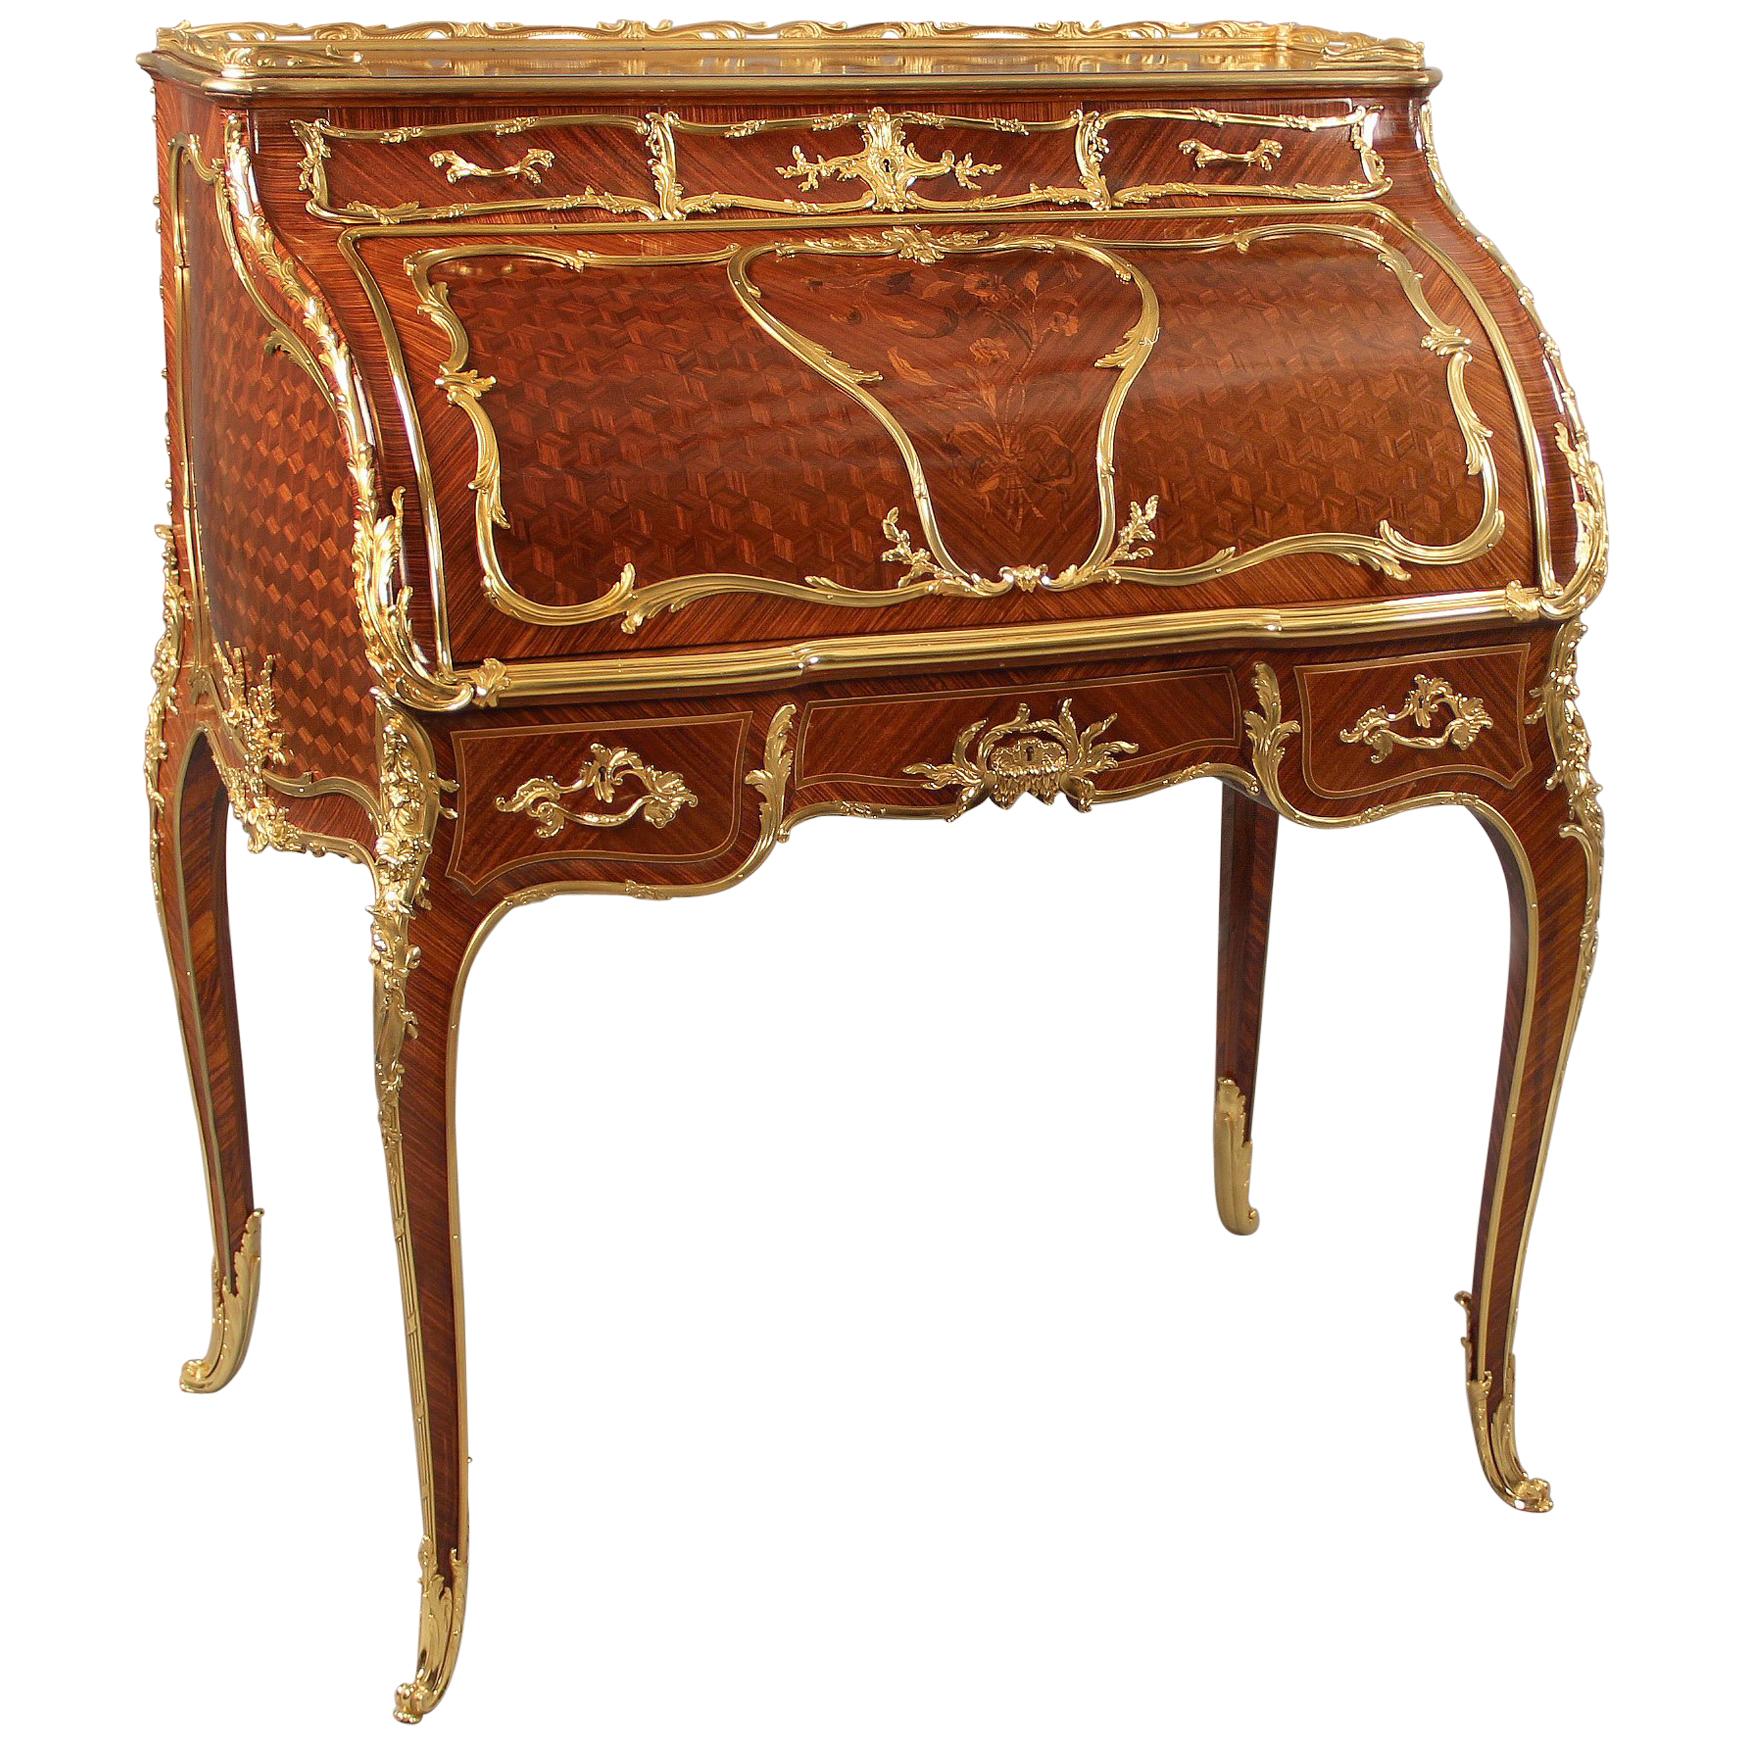 Late 19th Century Marquetry and Parquetry Bureau a Cylindre by François Linke